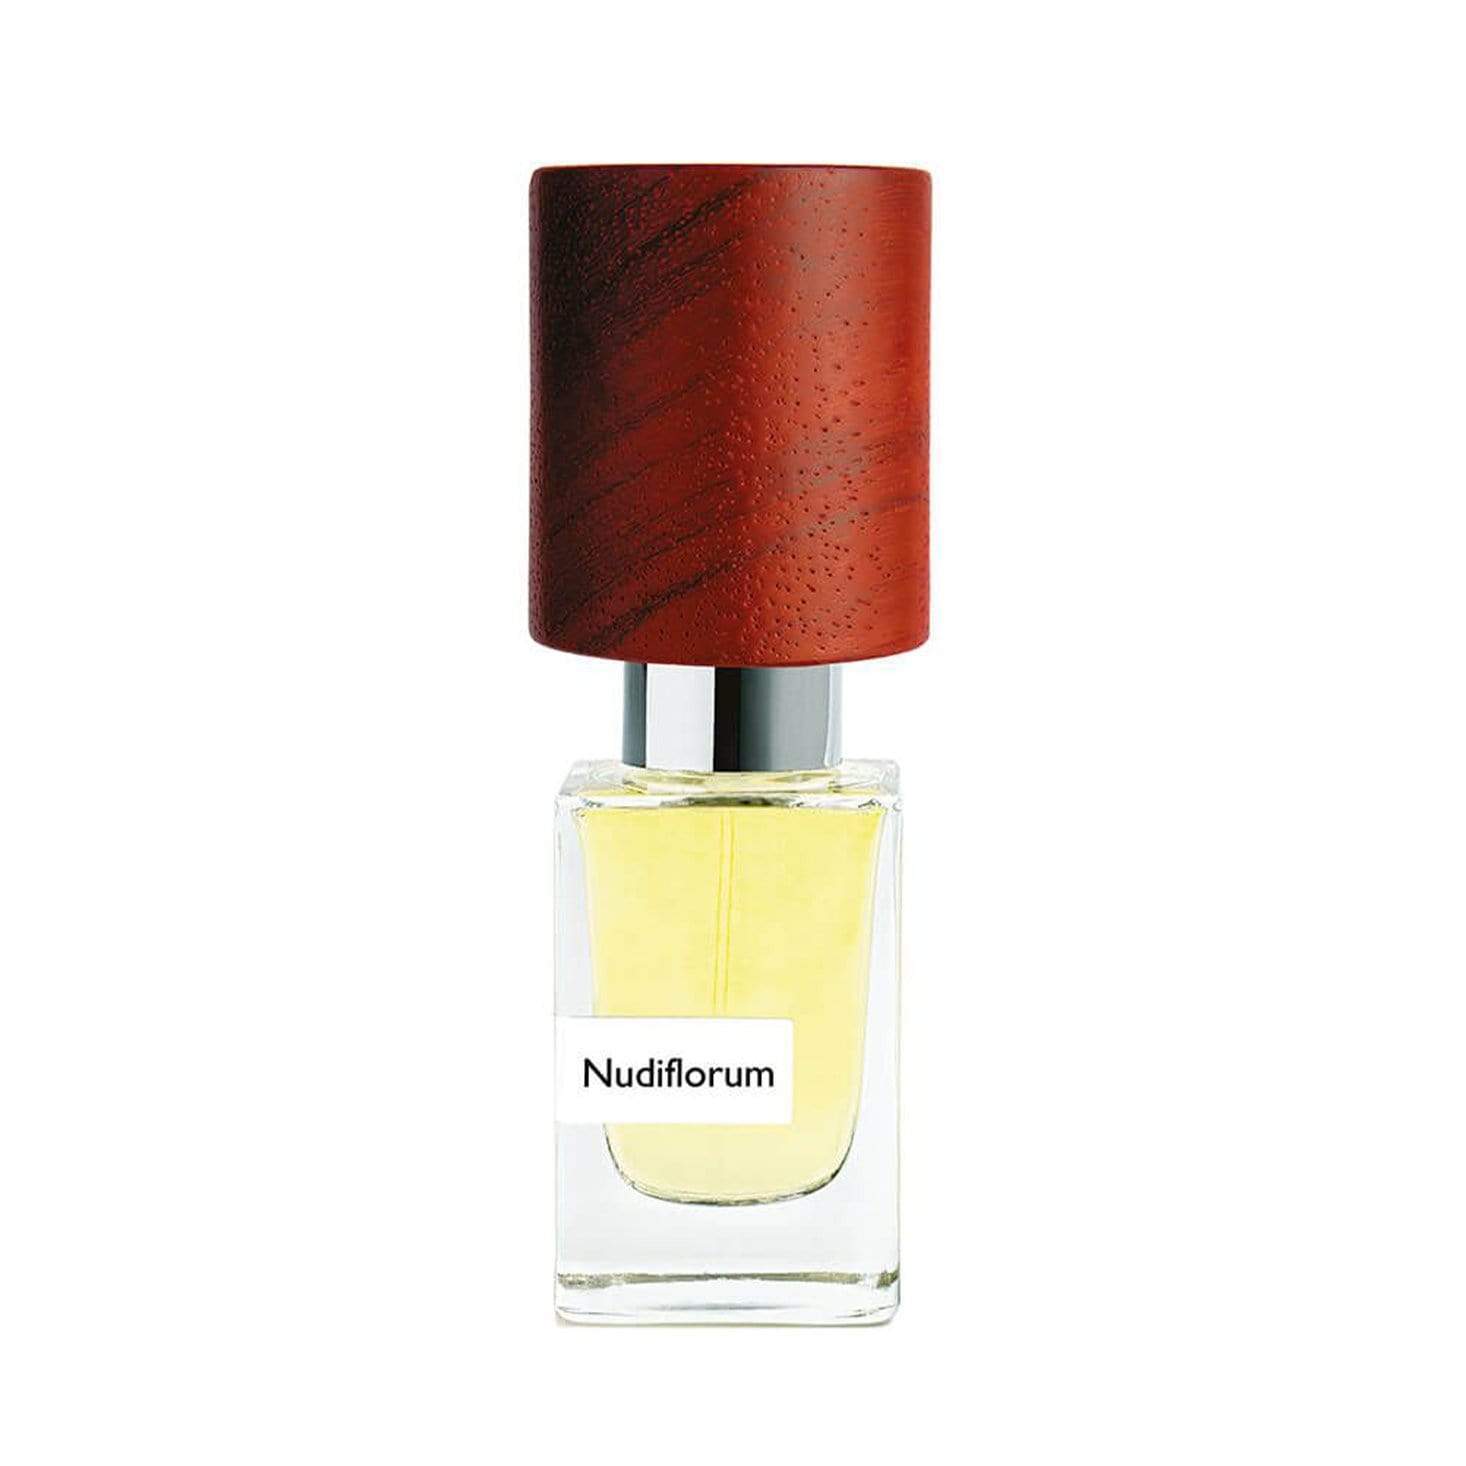 BEON.COM.AU Nasomatto's Nudiflorum is is the result of a research process aimed at finding the vanishing point in nature, the leaps of the senses, the naked desire. It is at its core a sensual, primitive fragrance with a high degree of olfactory intimacy. It is the allegory of a tactile sensation. The li... Nasomatto at BEON.COM.AU